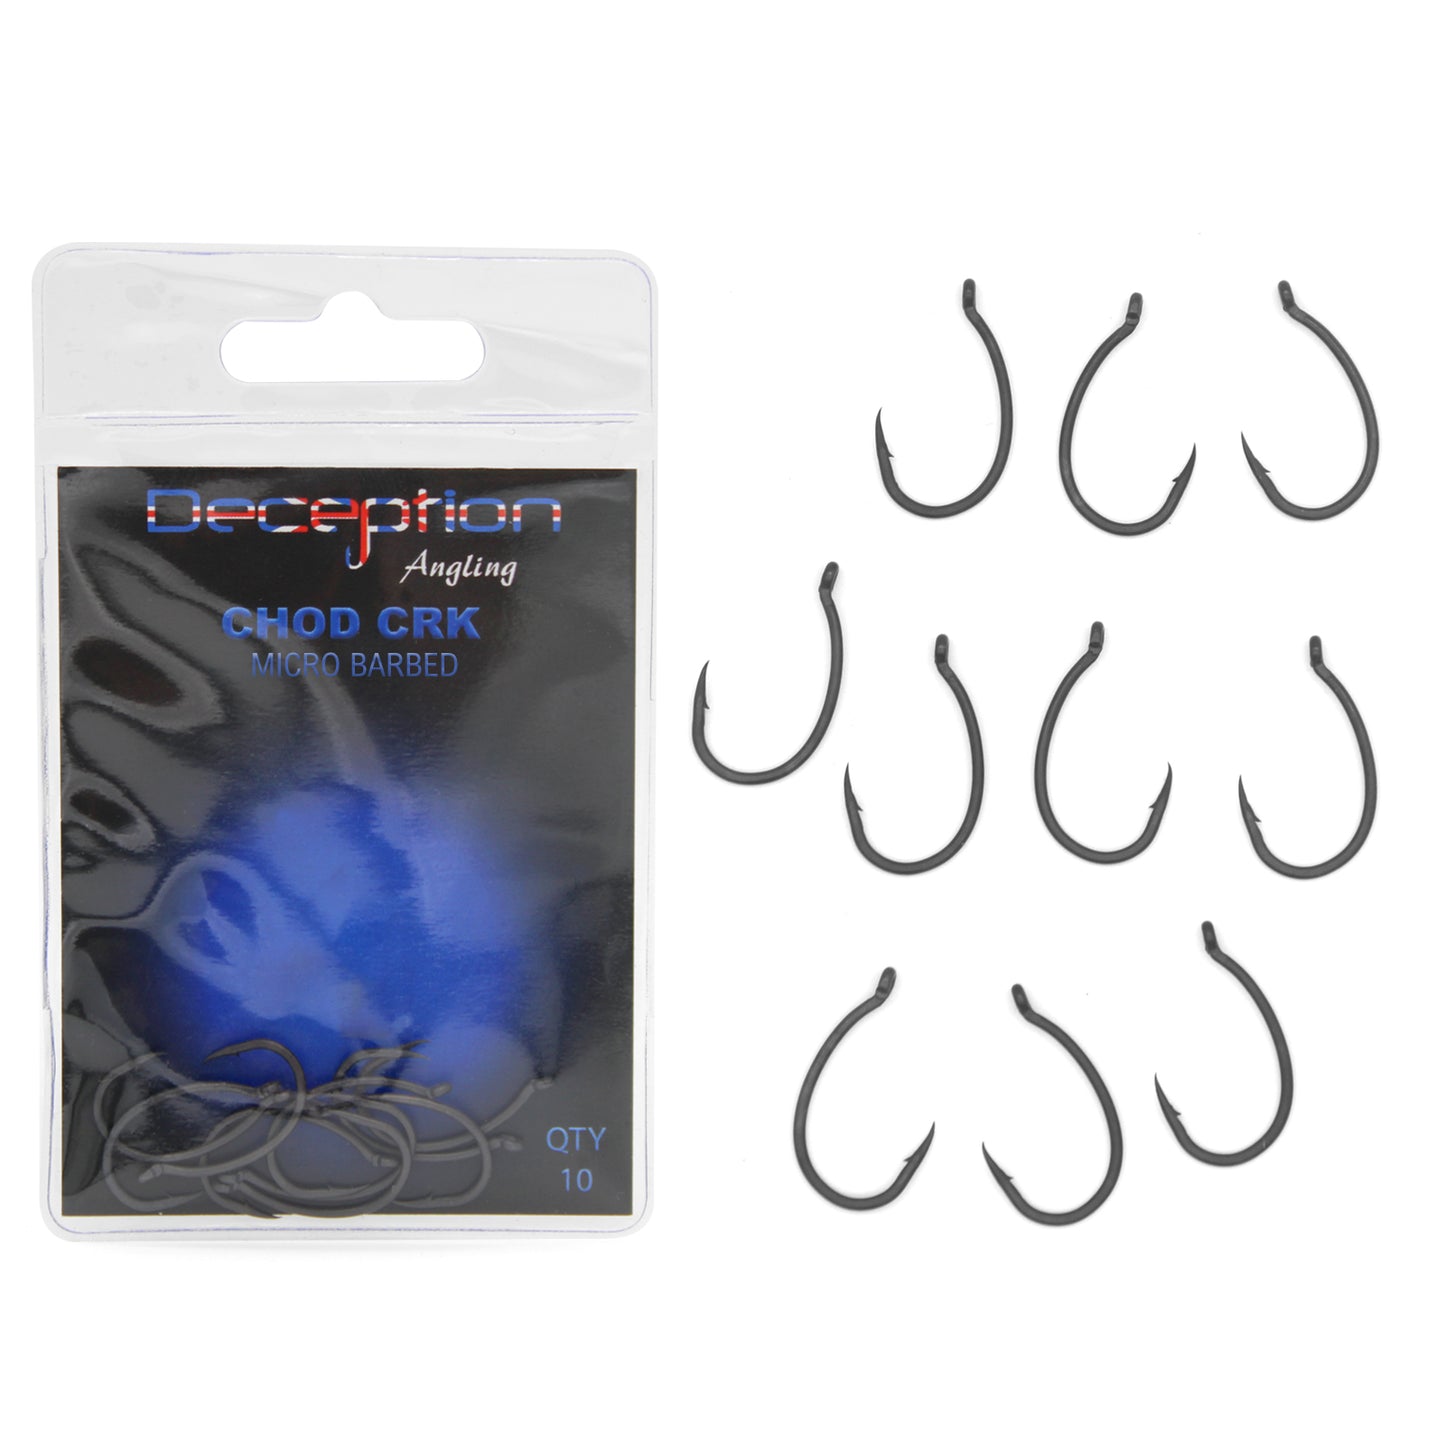 Deception Angling Chod CRK Micro Barbed Fishing Hooks Pack of 10